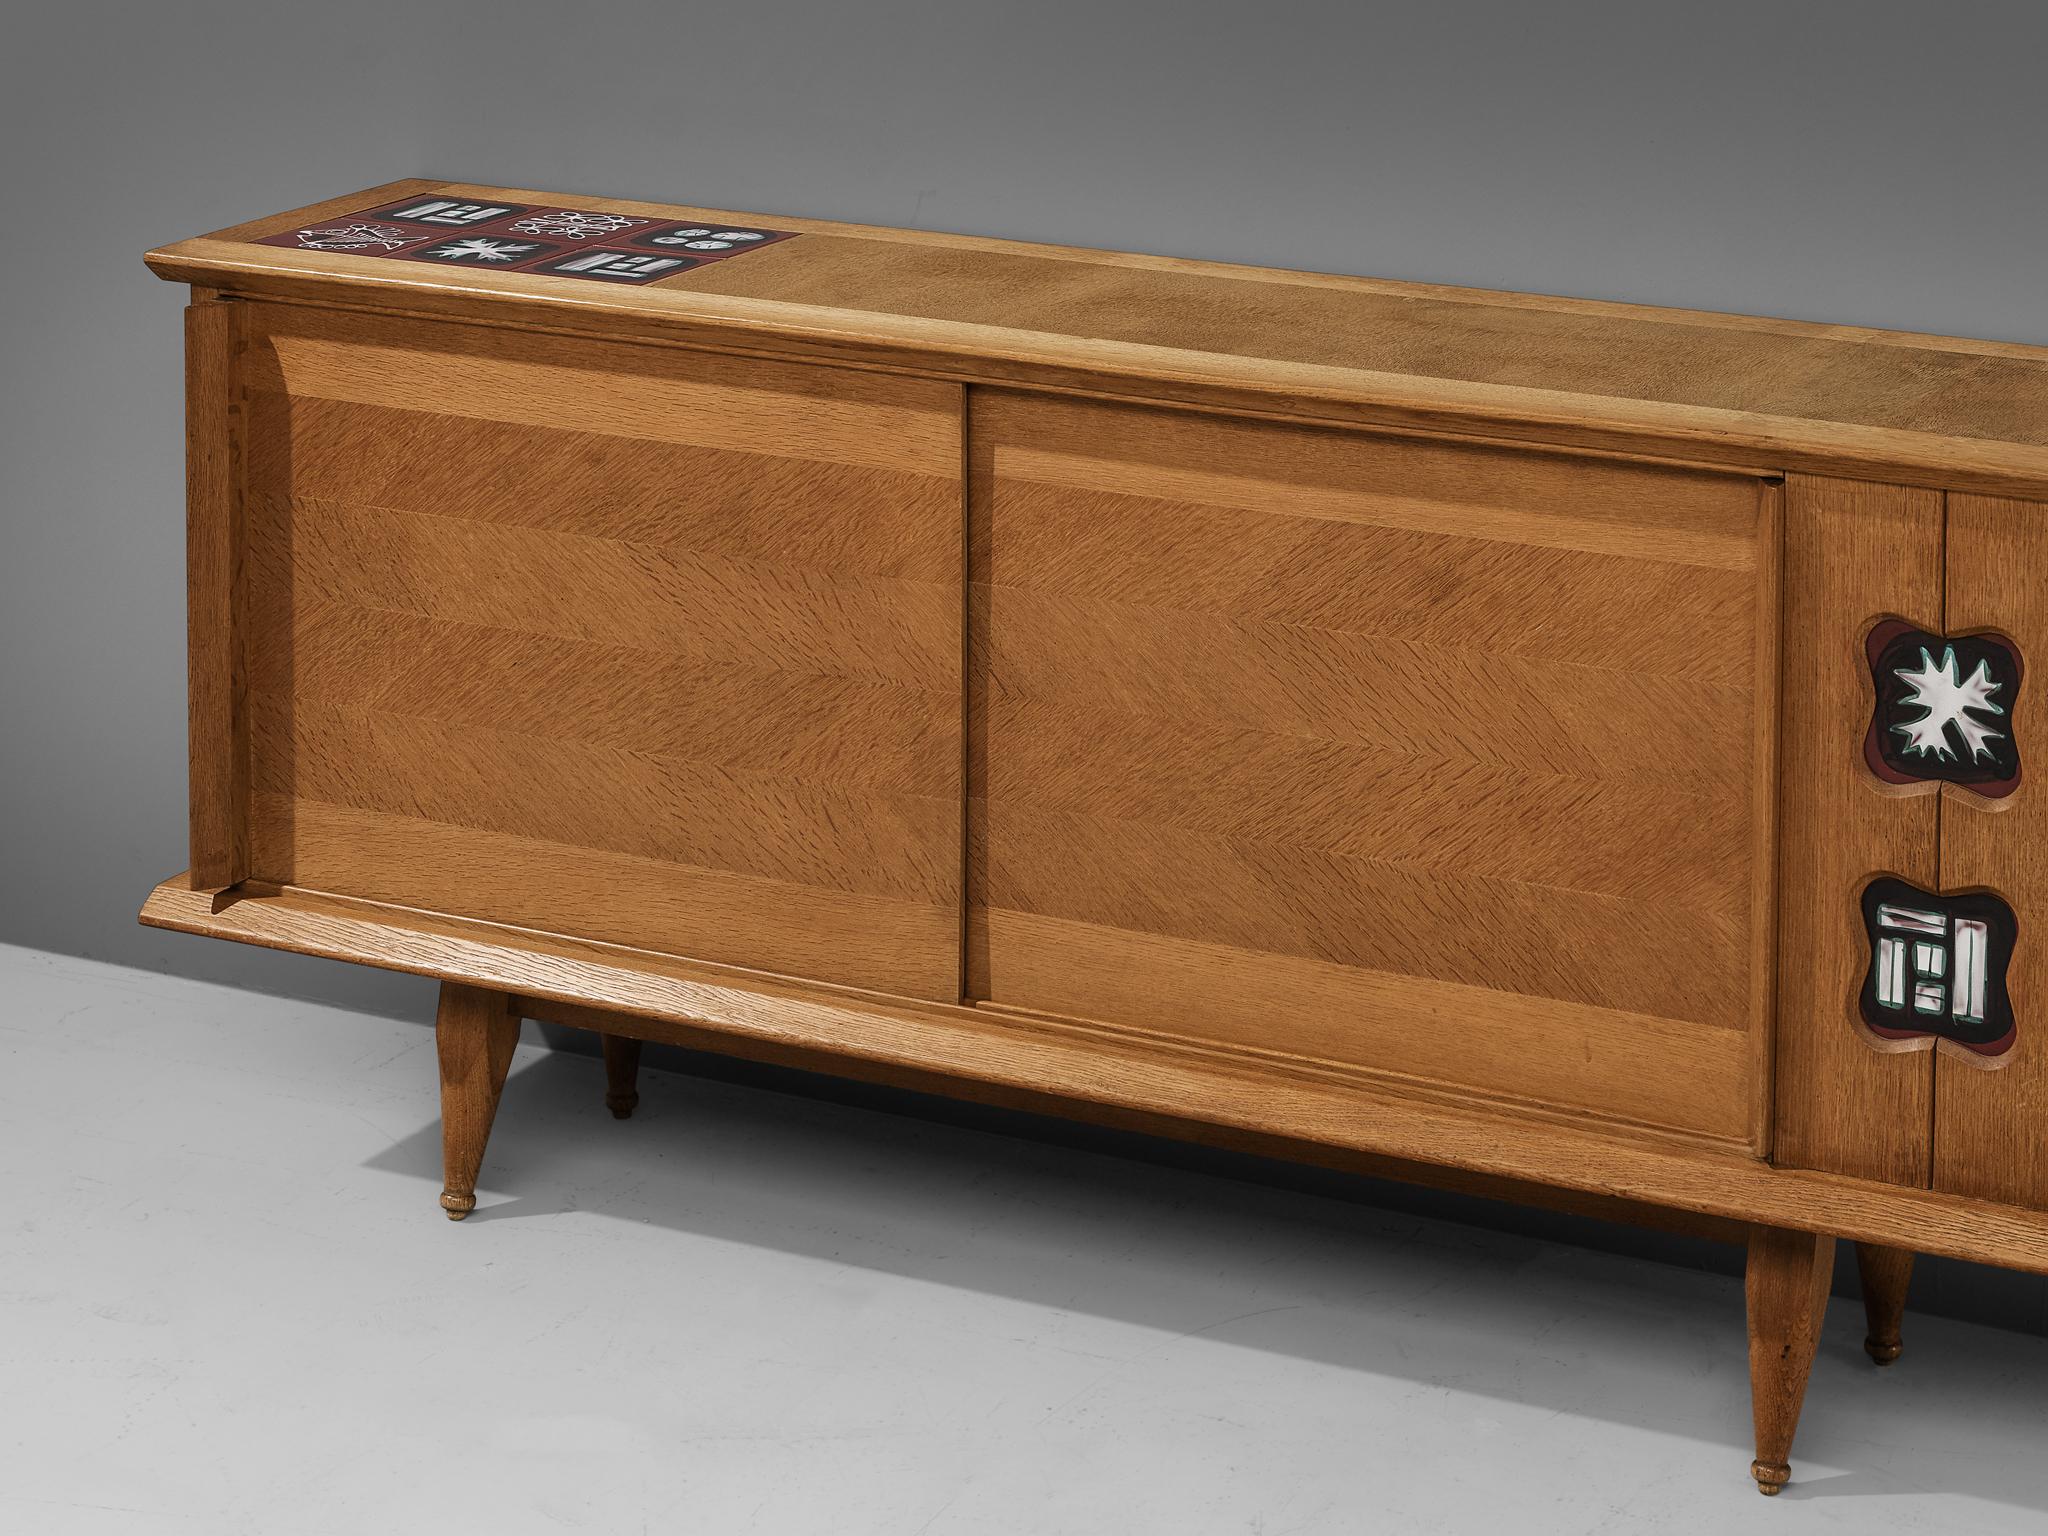 French Guillerme et Chambron Sideboard in Oak with Ceramic Tiles